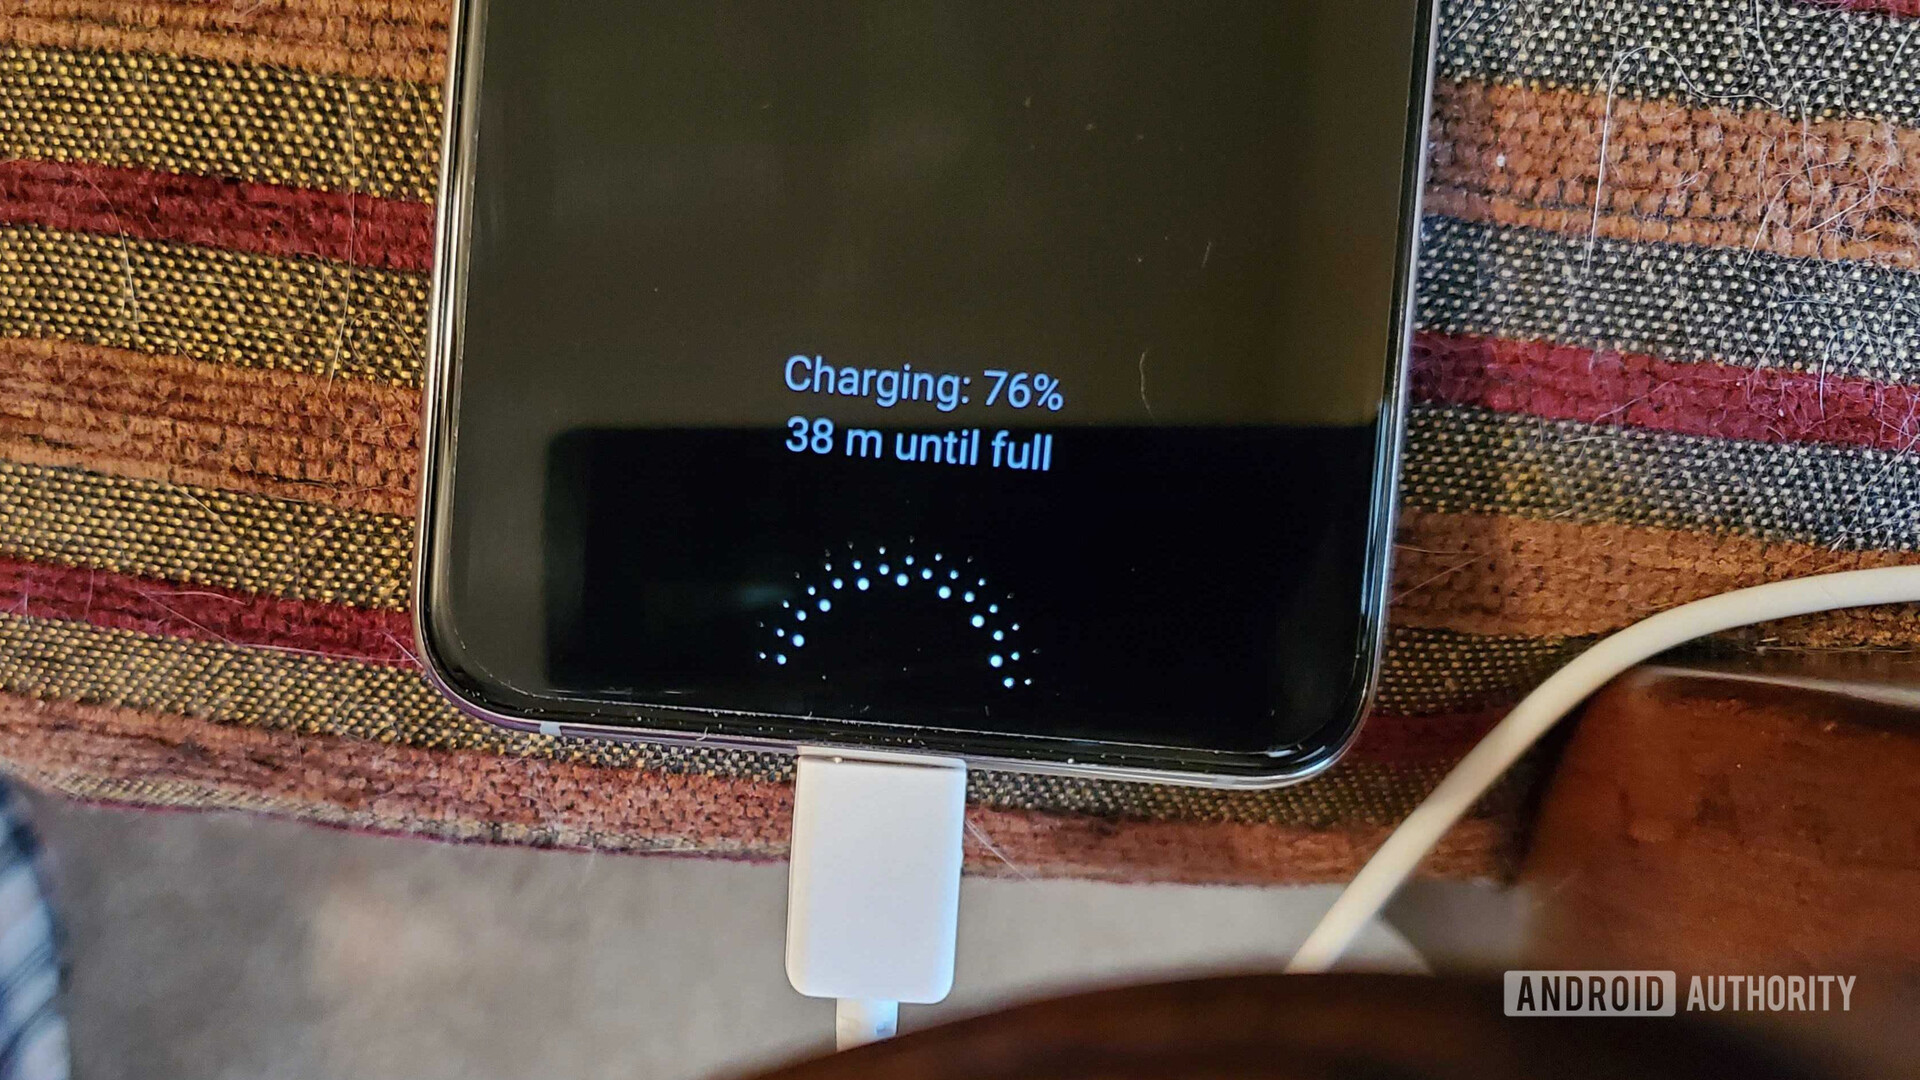 Samsung Galaxy Note 10 charging on the sofa